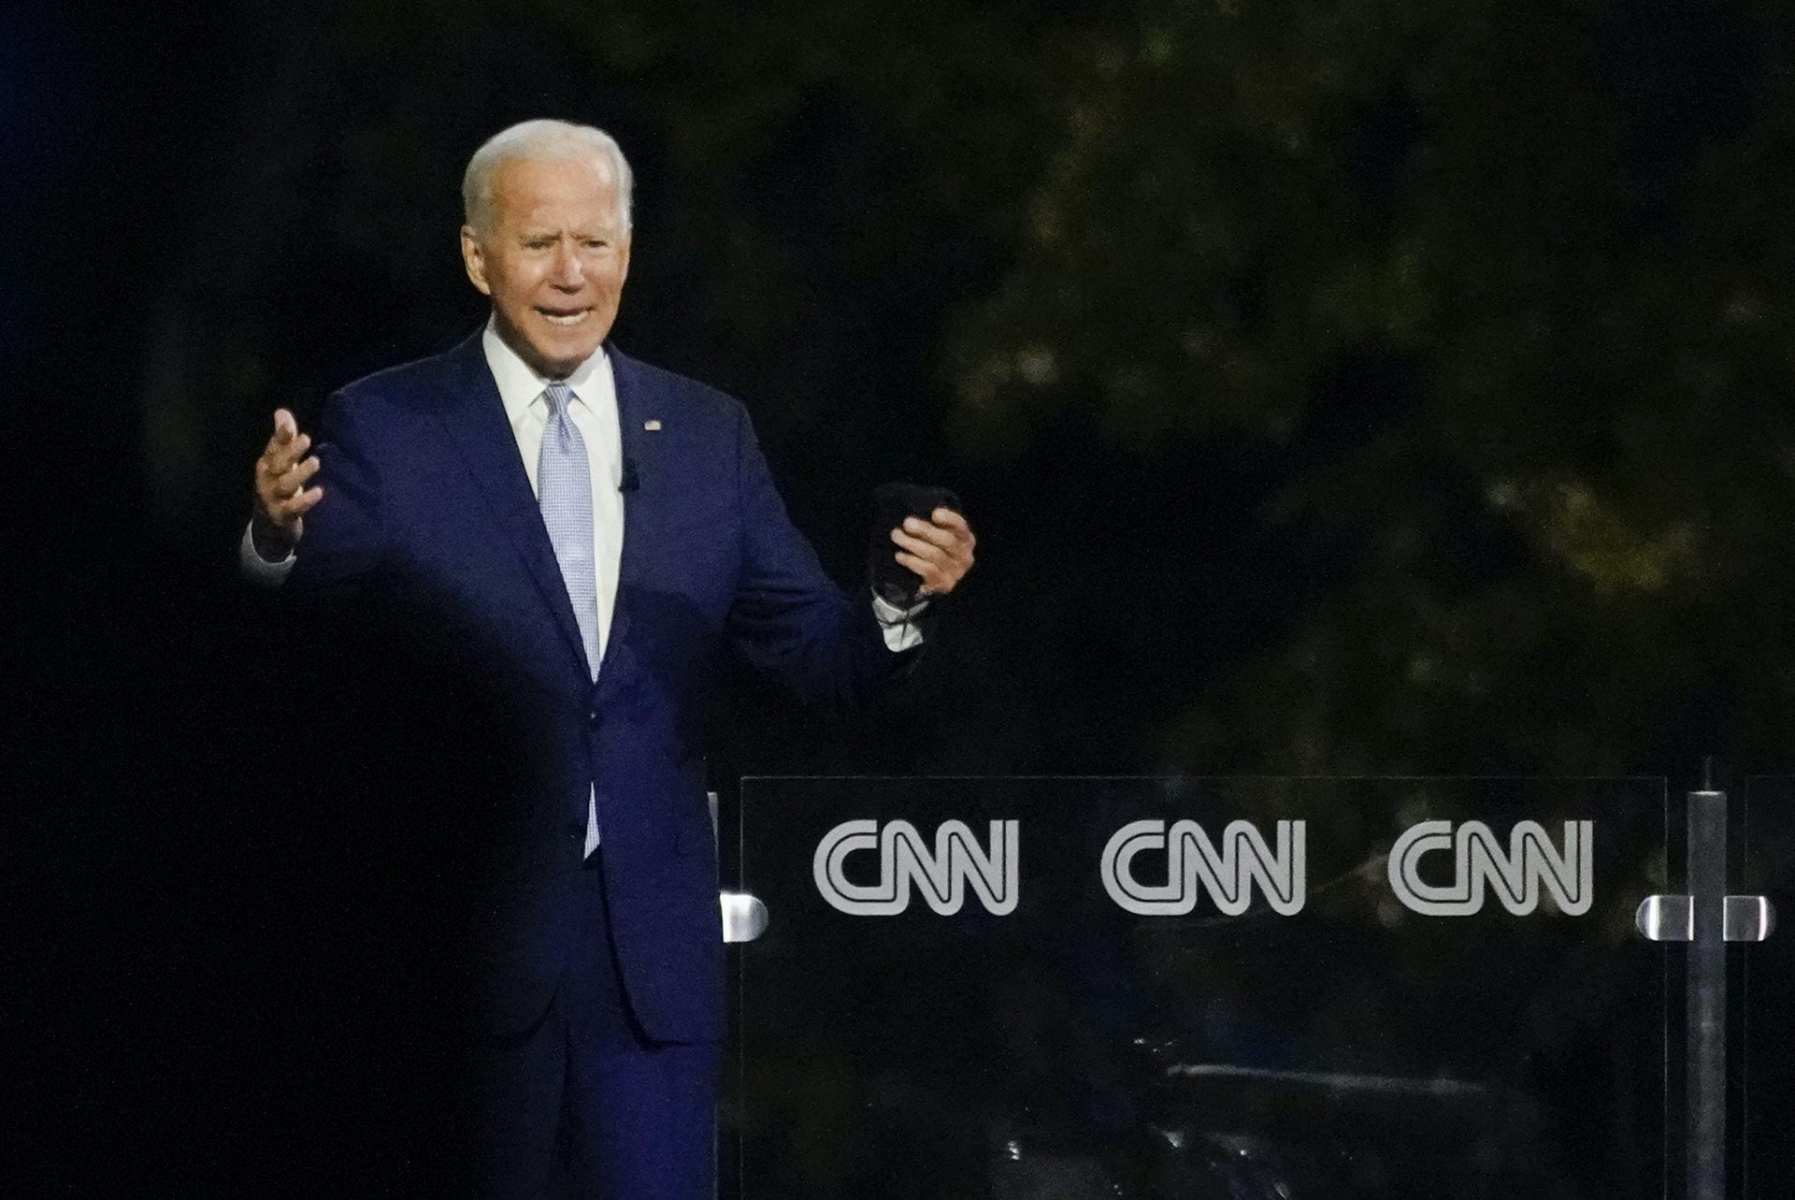 Joe Biden speaks to a crowd from a stage at a town hall event.